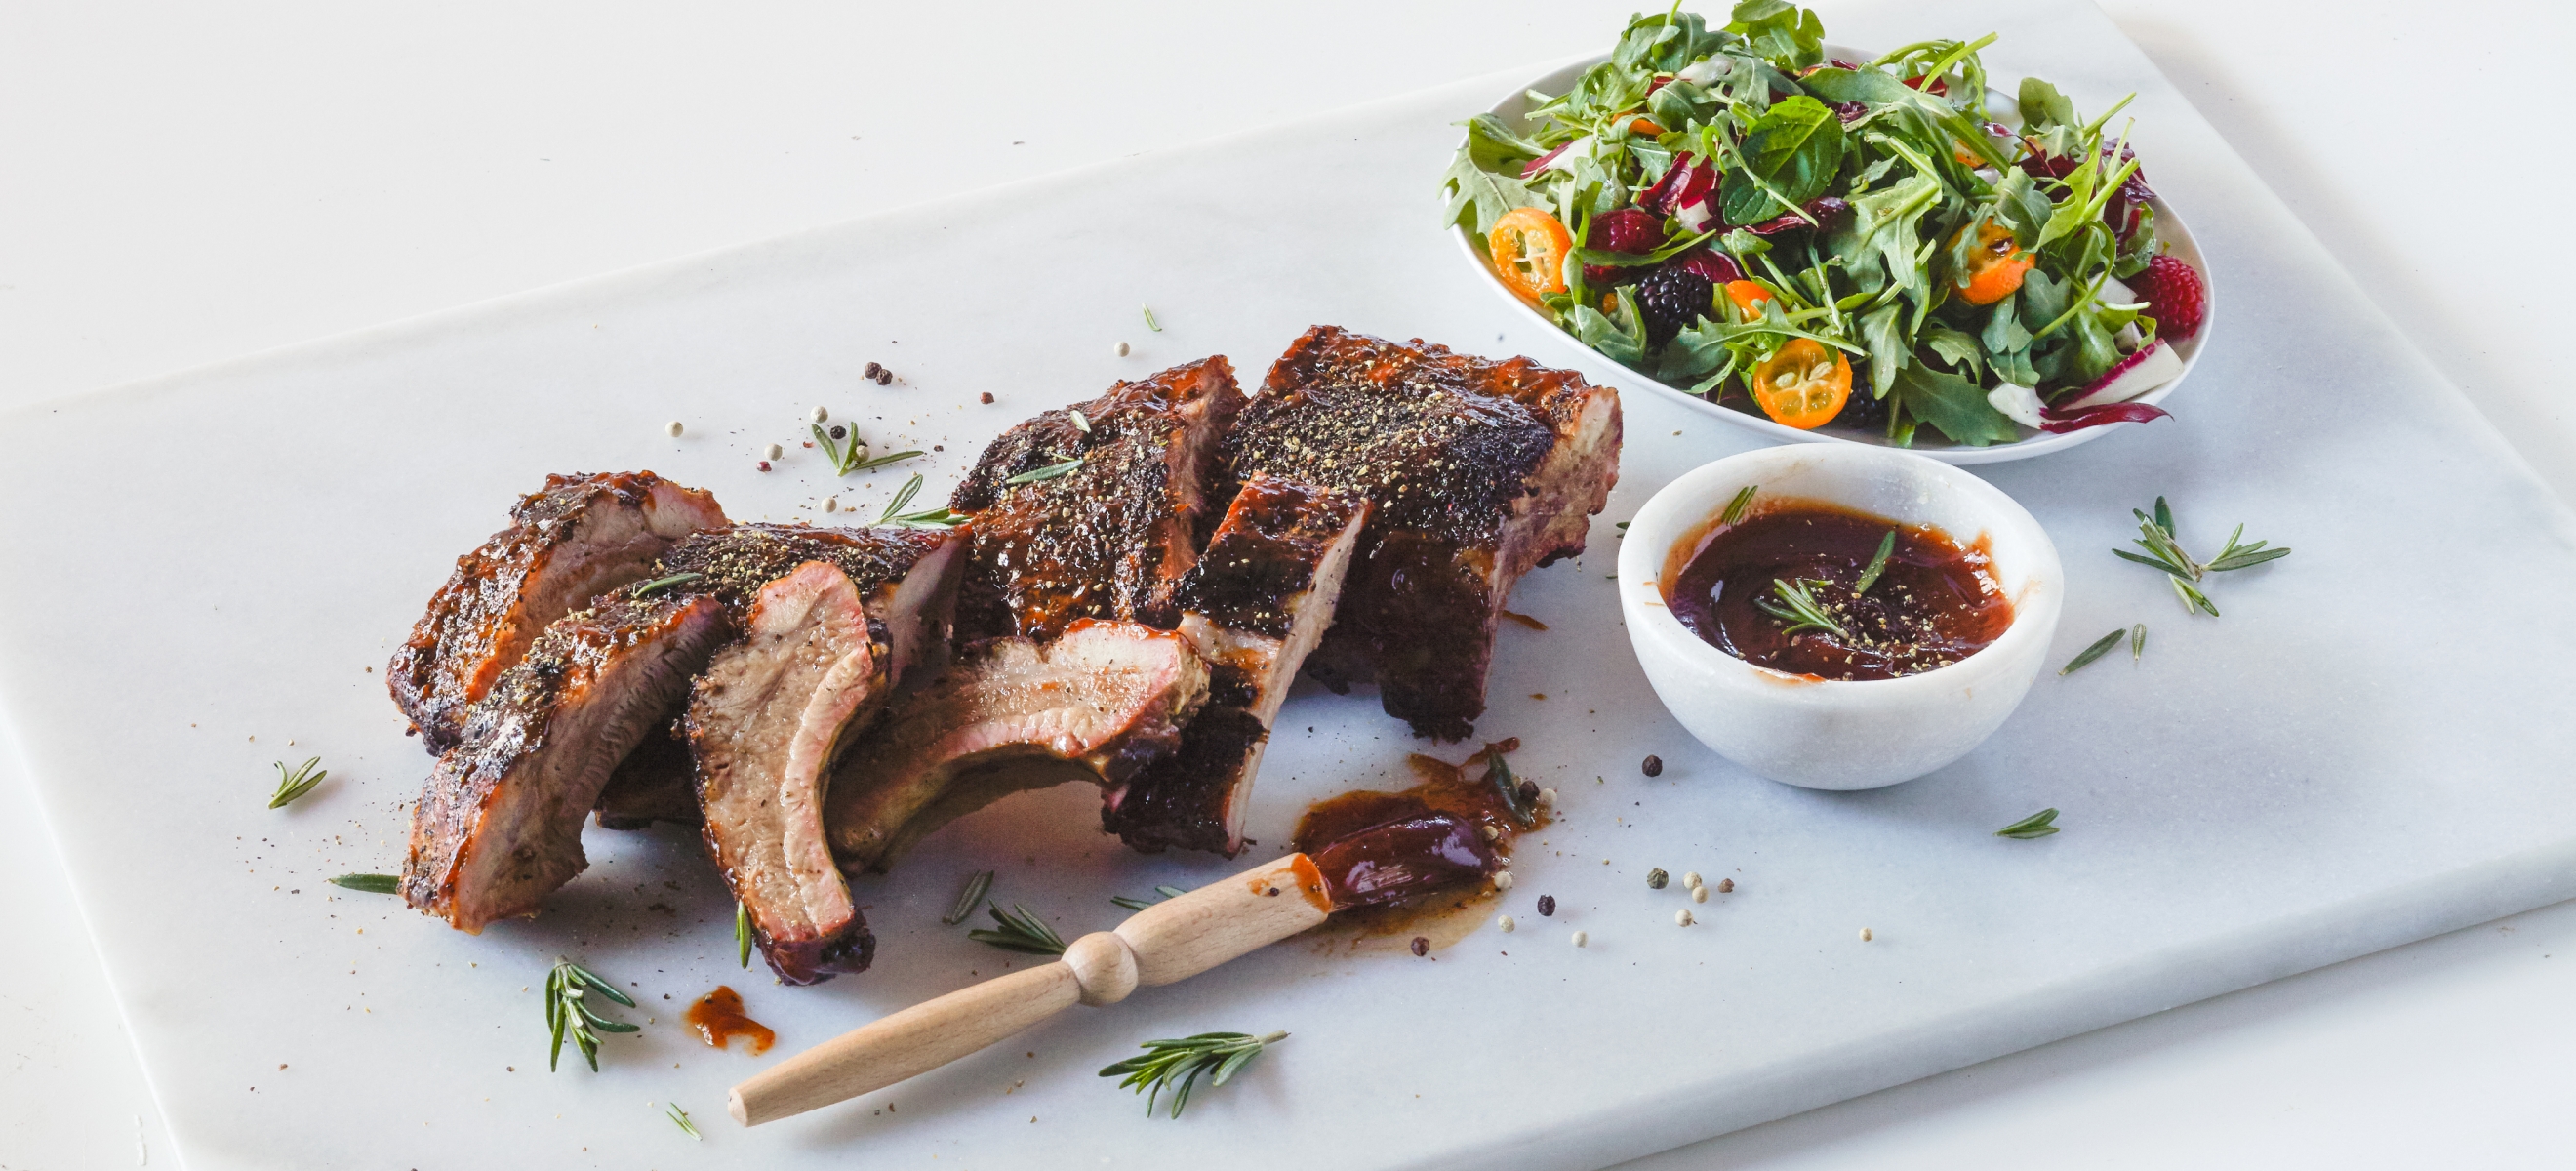 a rectangular white platter holding baby back ribs, rib sauce, and a salad